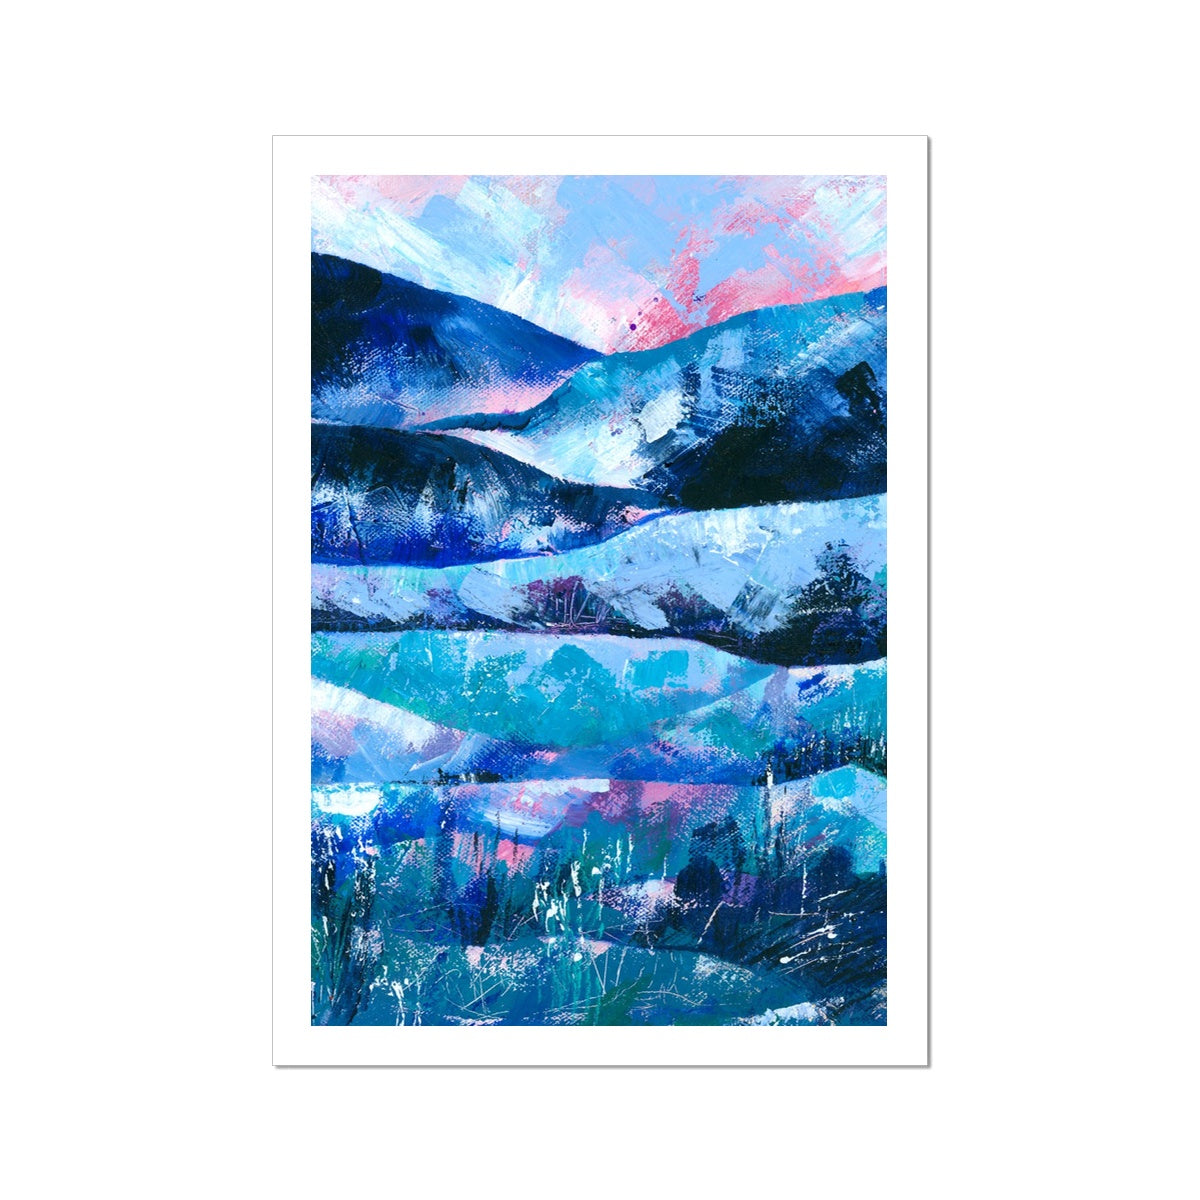 Tranquility abstract landscape painting art print shown with a white border around it.